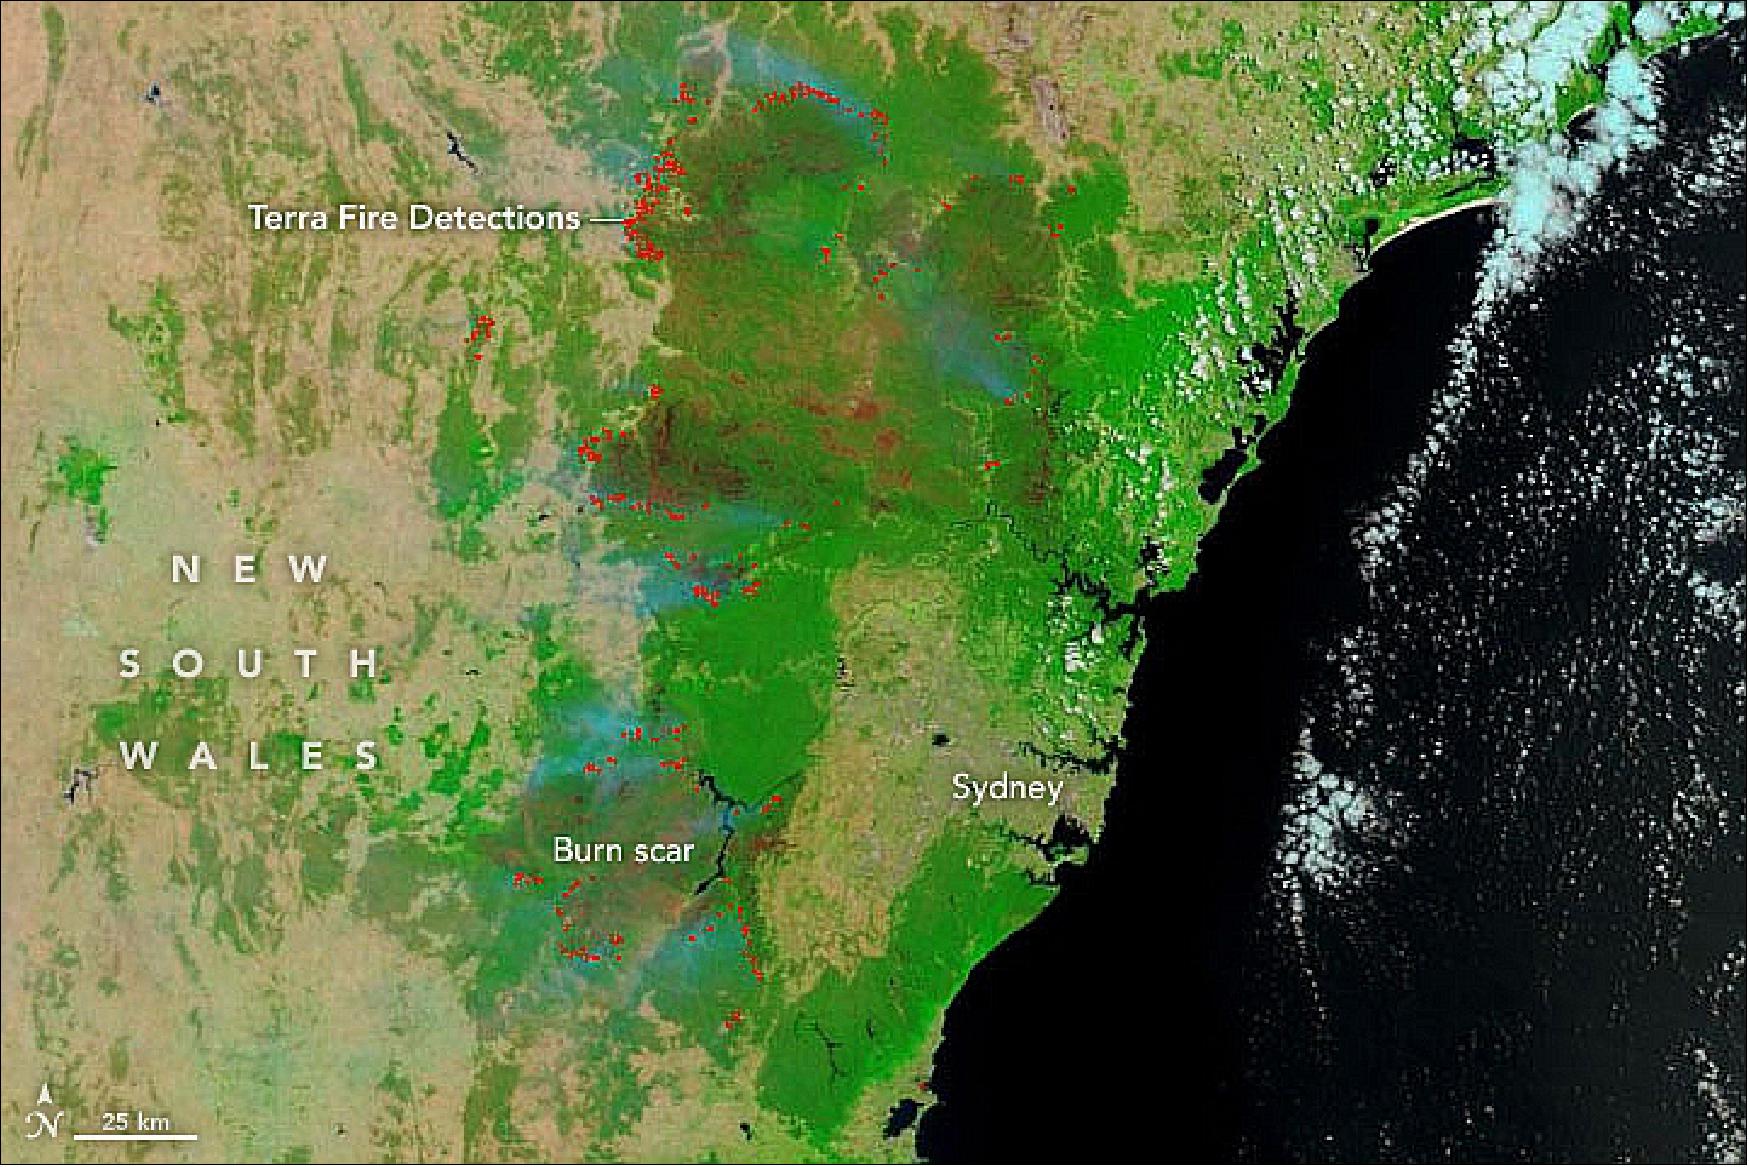 Figure 2: This image was acquired on 17 December 2019 with MODIS (Moderate Resolution Imaging Spectroradiometer) on Terra. The false-color image combines visible and infrared light (bands 7-2-1) to distinguish fire burn scars (orange to brown) from healthy vegetation (green) in New South Wales, Australia. Red pixels represent areas where Terra detected heat signatures indicative of active fire (image credit: NASA Earth Observatory, image by Joshua Stevens and Lauren Dauphin using MODIS data from NASA EOSDIS/LANCE and GIBS/Worldview. Story by Michael Carlowicz)